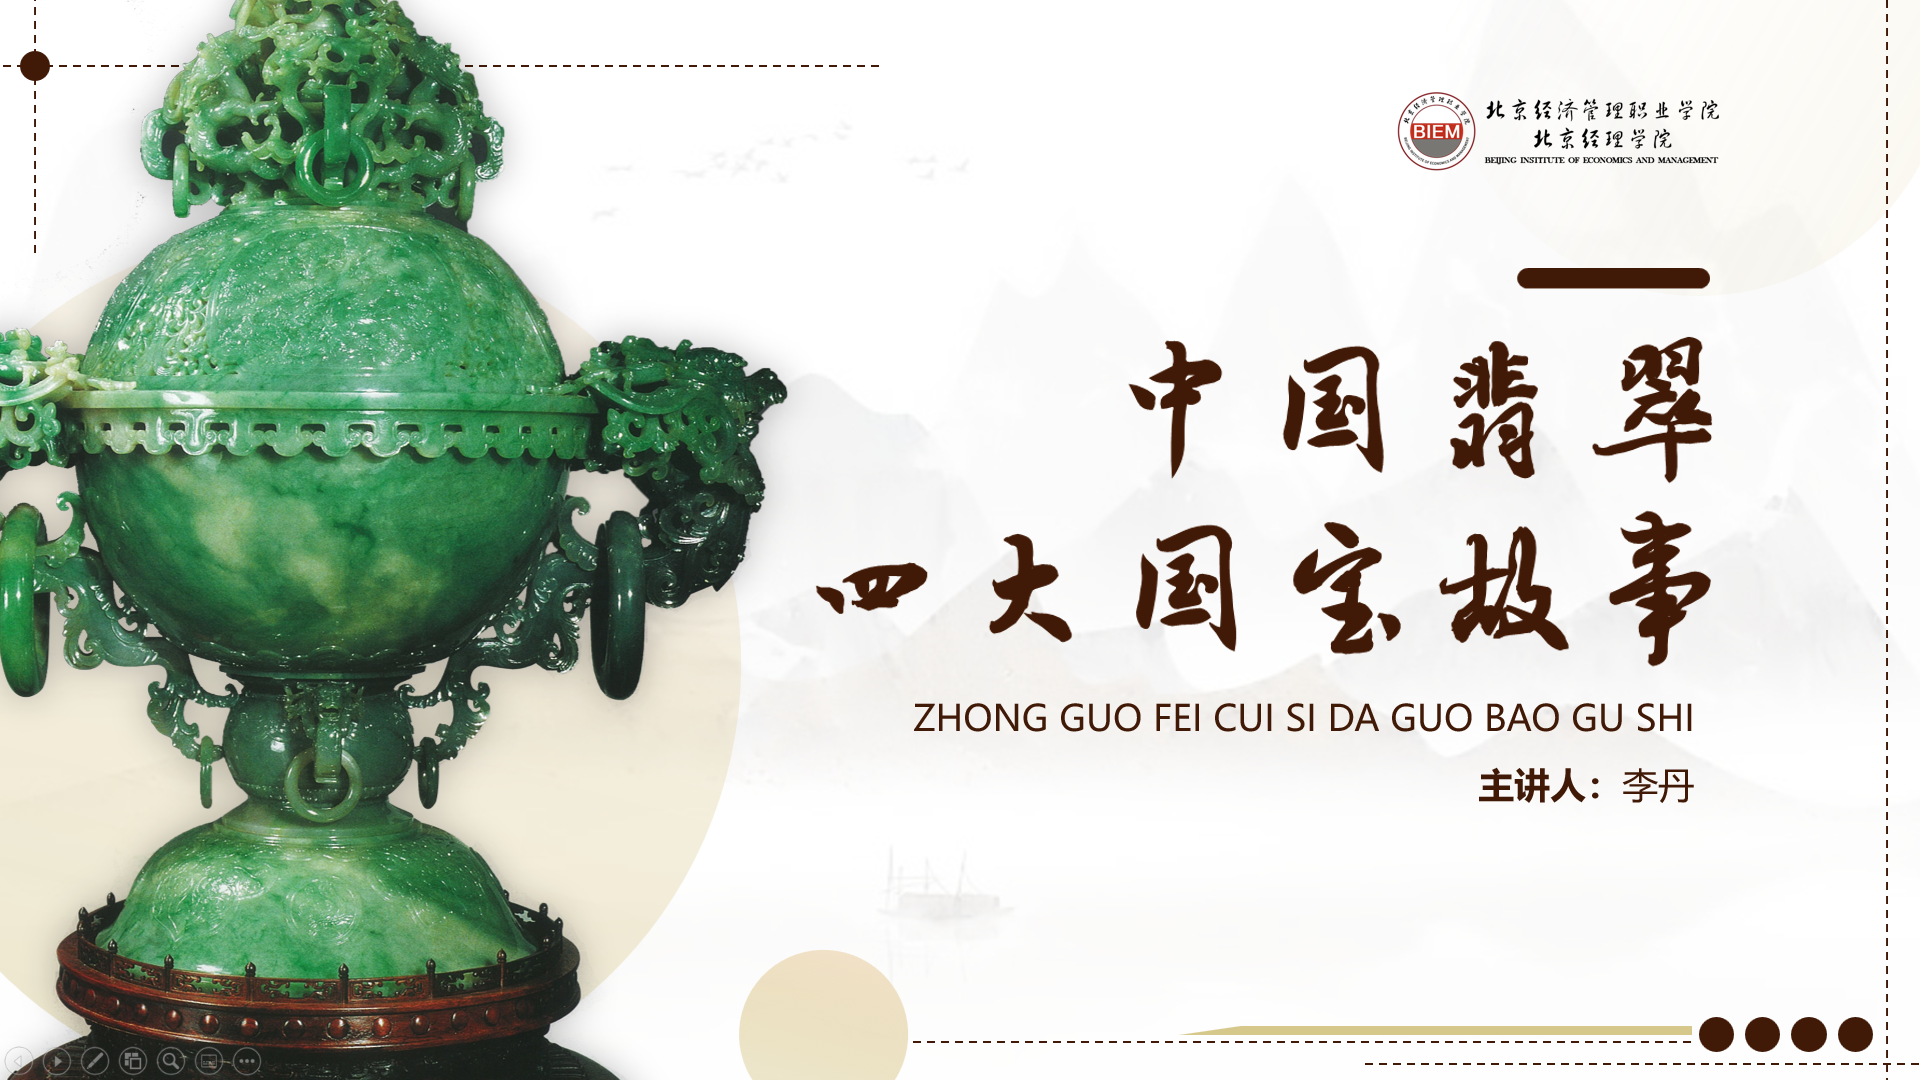 The story of China’s four national treasures of jadeite